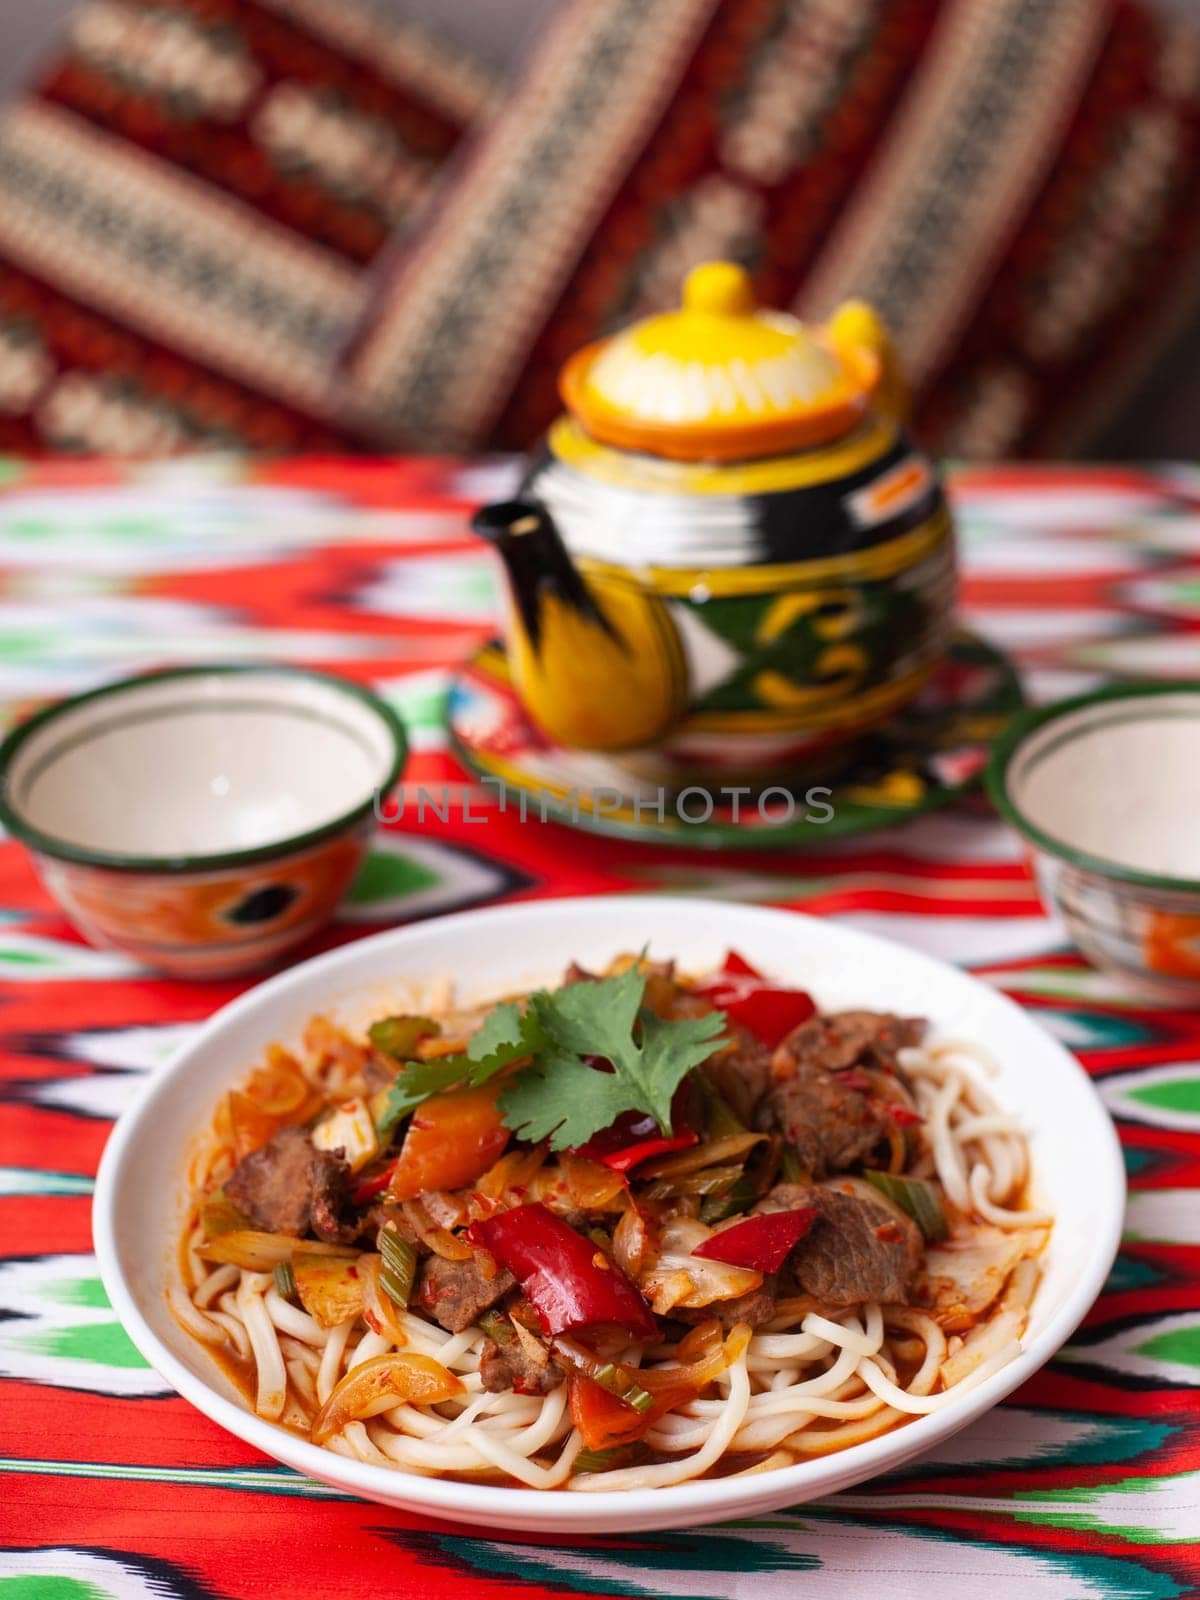 The oriental lagman dish is homemade noodles fried with meat, vegetables and herbs. Eastern cuisine by tewolf